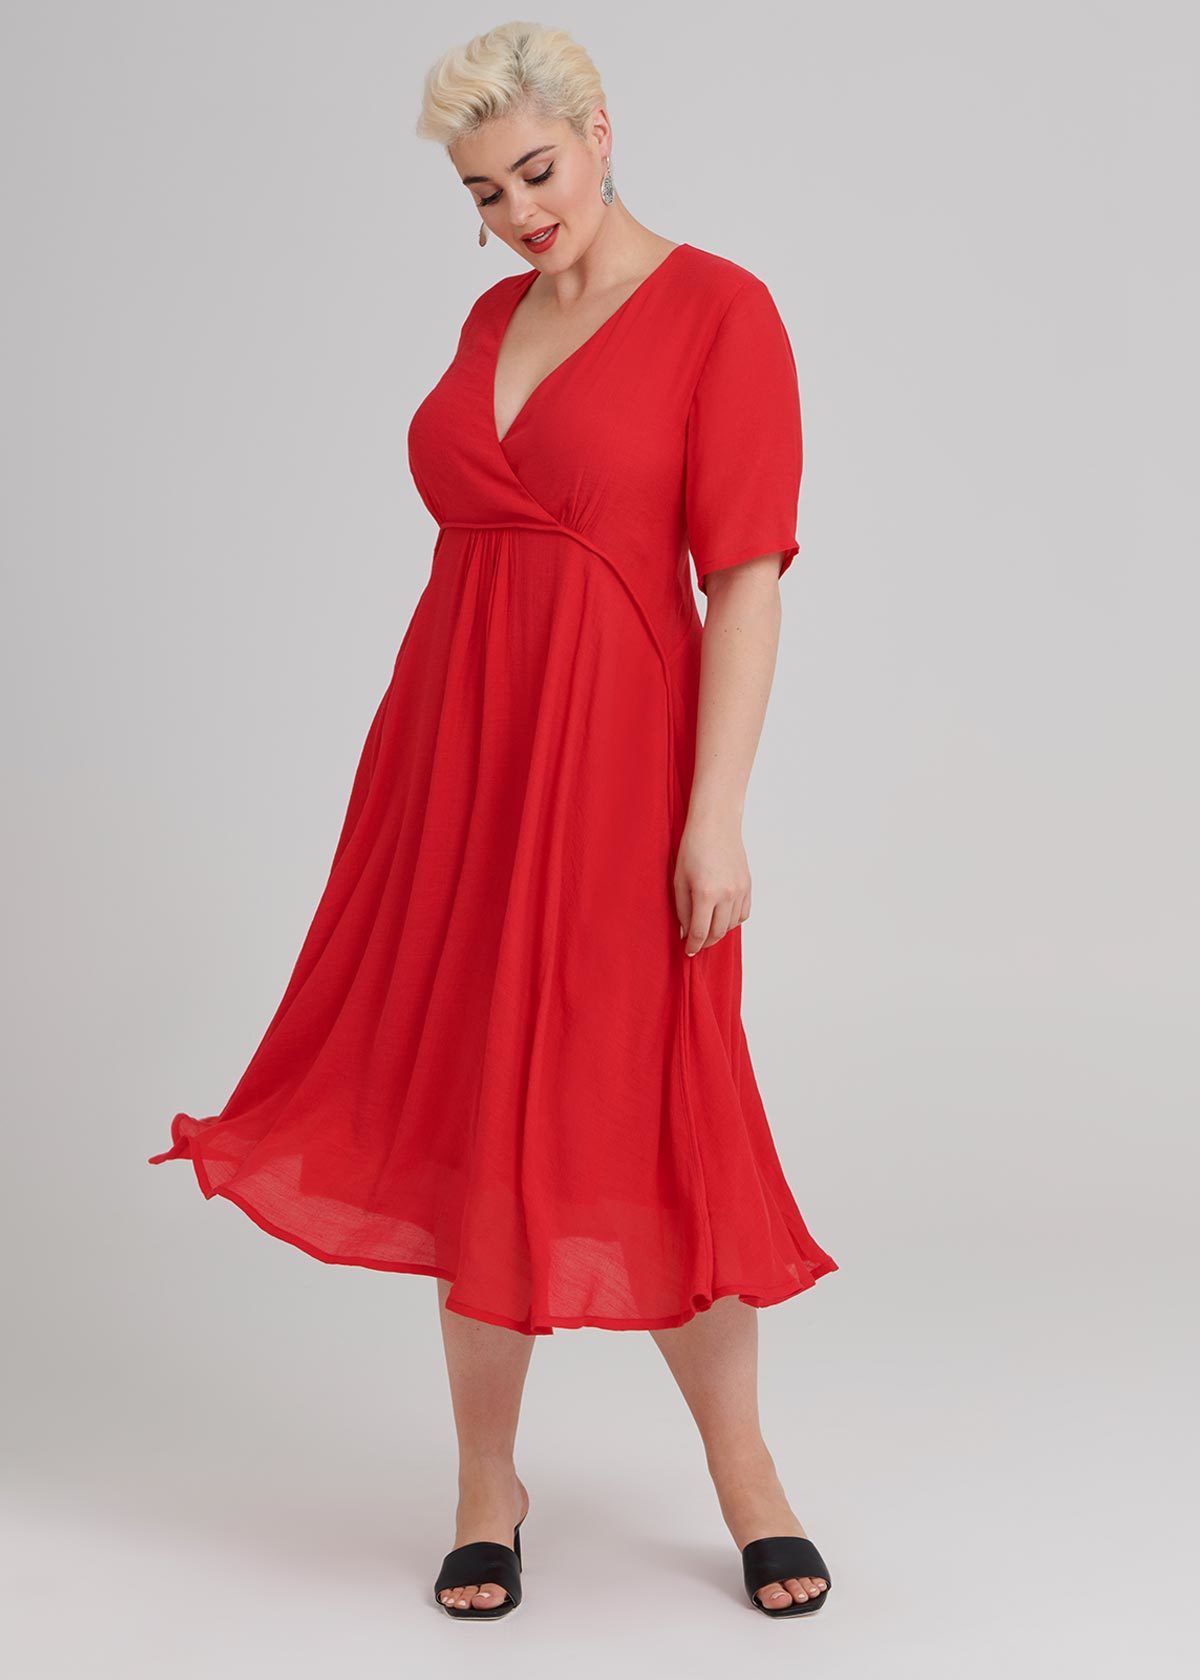 Taking Shape | Where to buy plus size clothes online | Beanstalk Mums